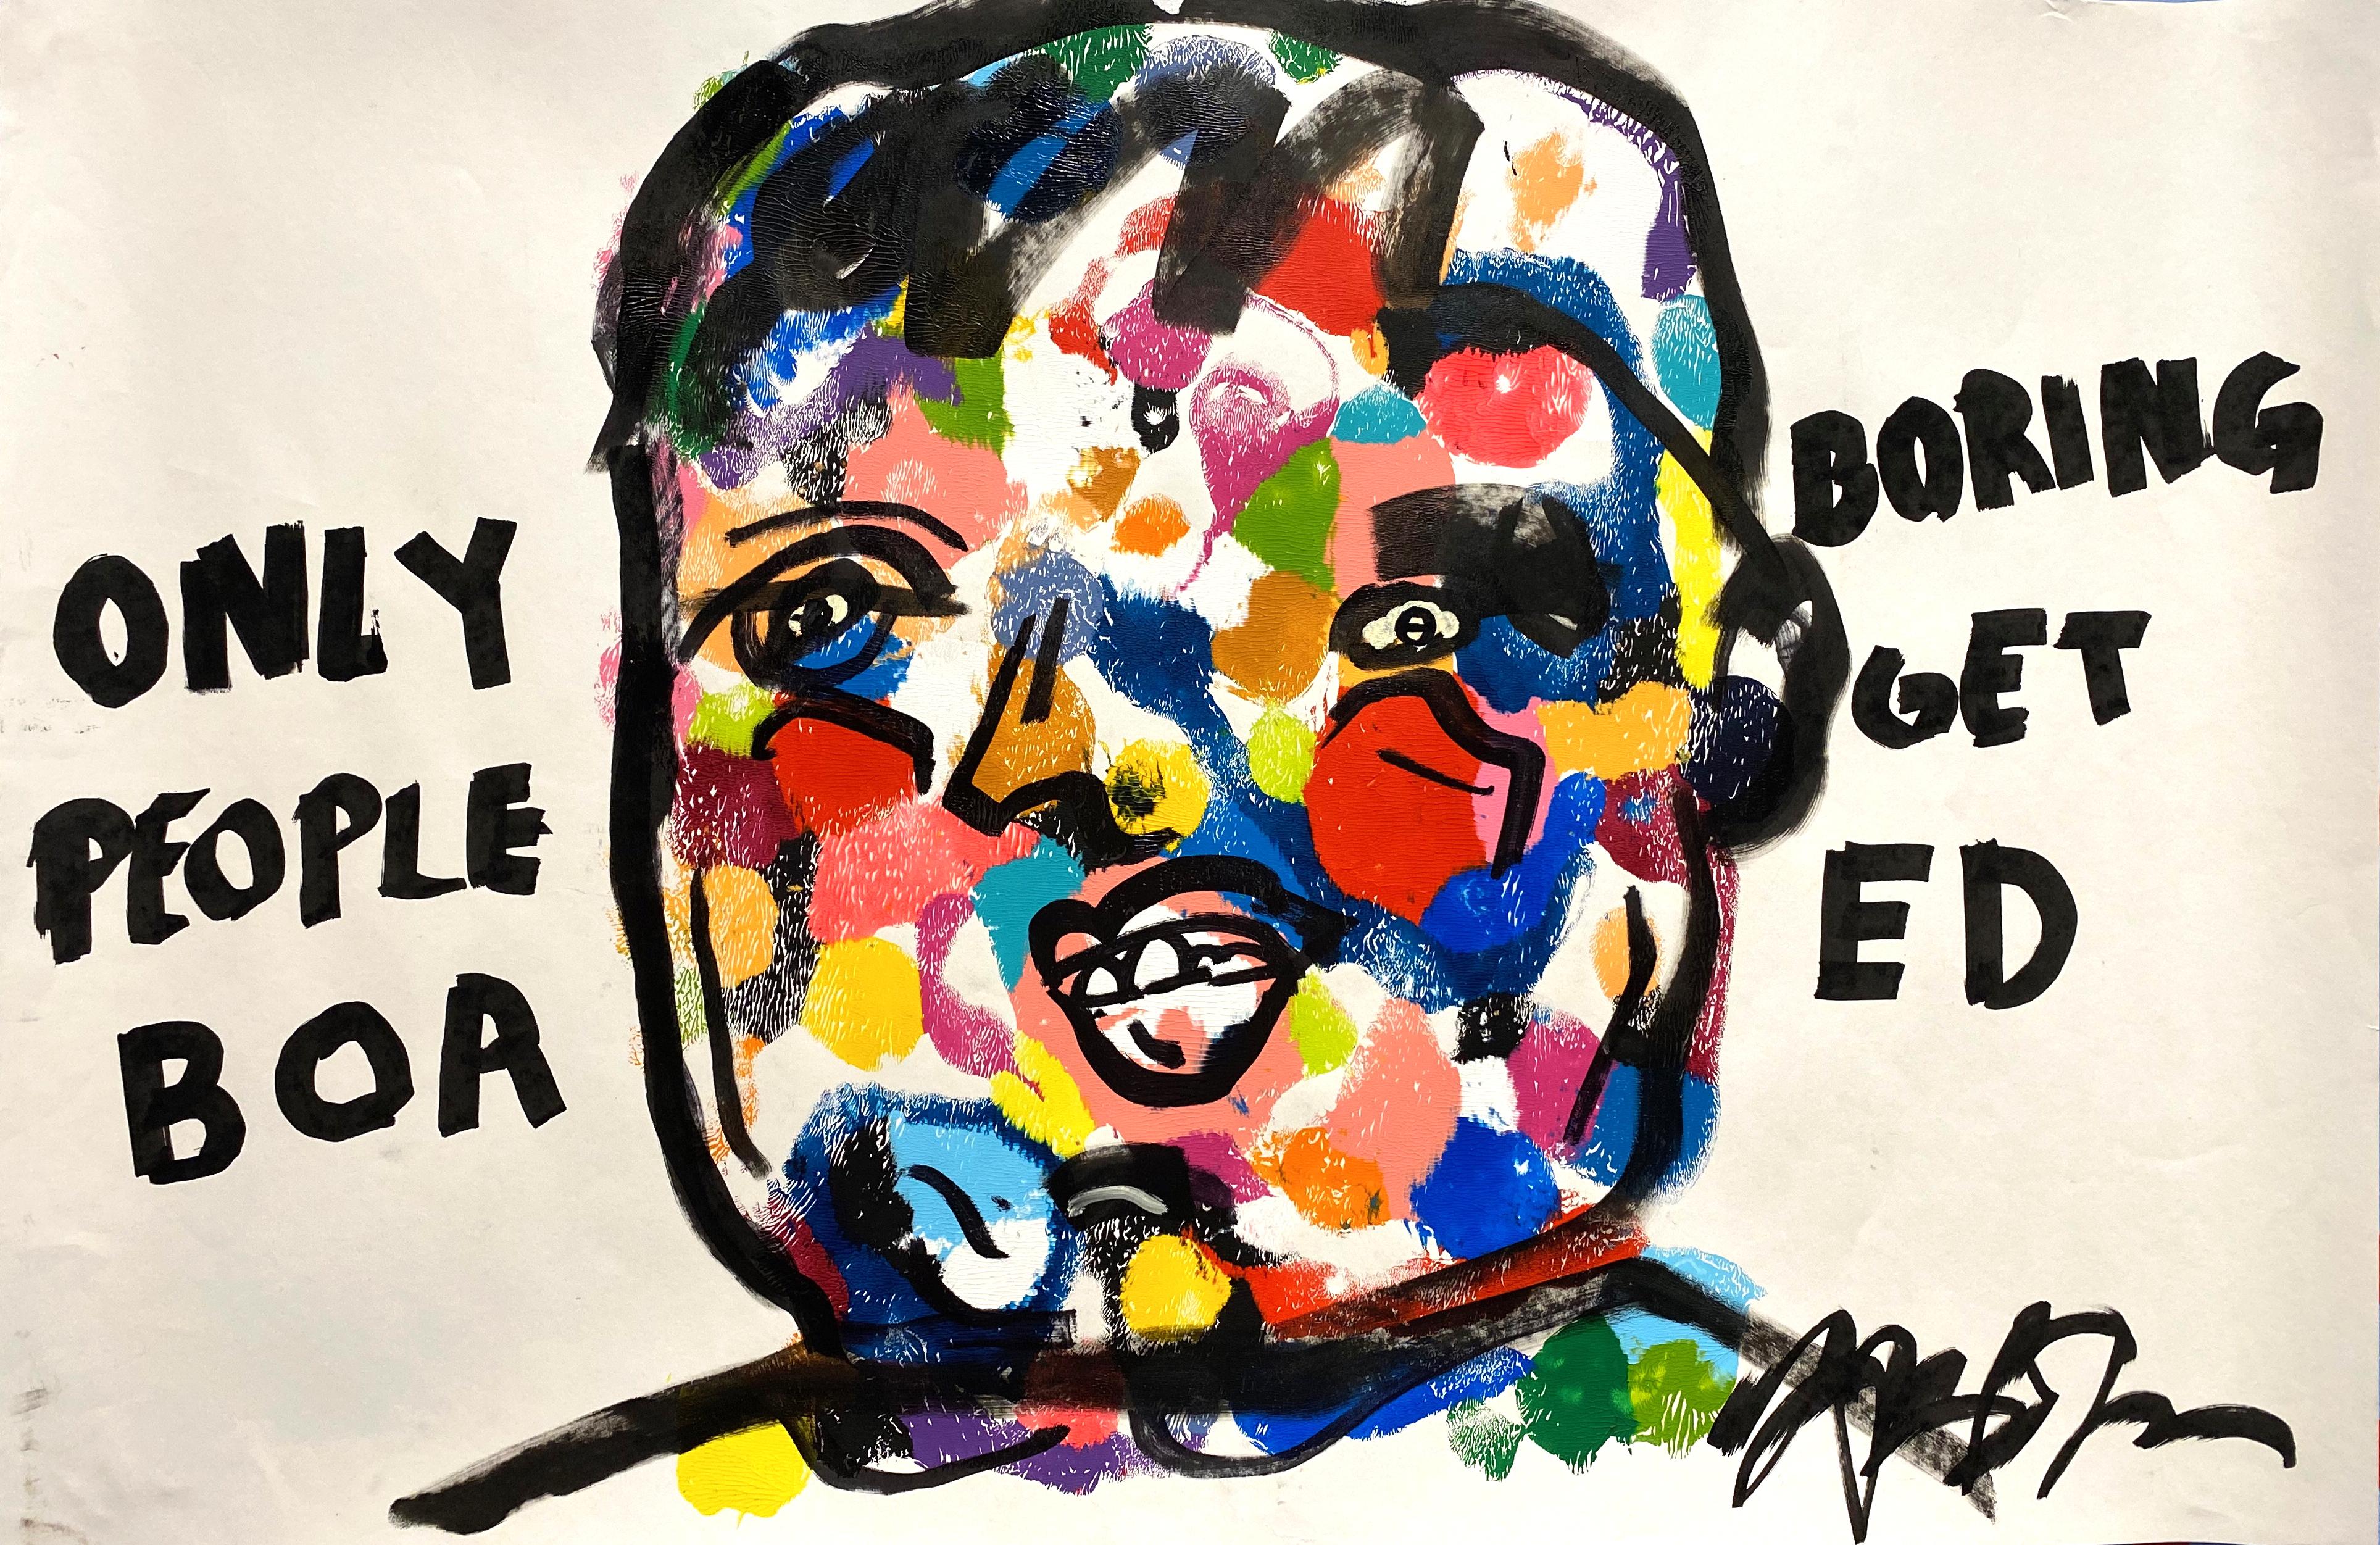  "Only Boring People Get Bored"- Acrylic and Ink on Paper, Black, Multi-color 